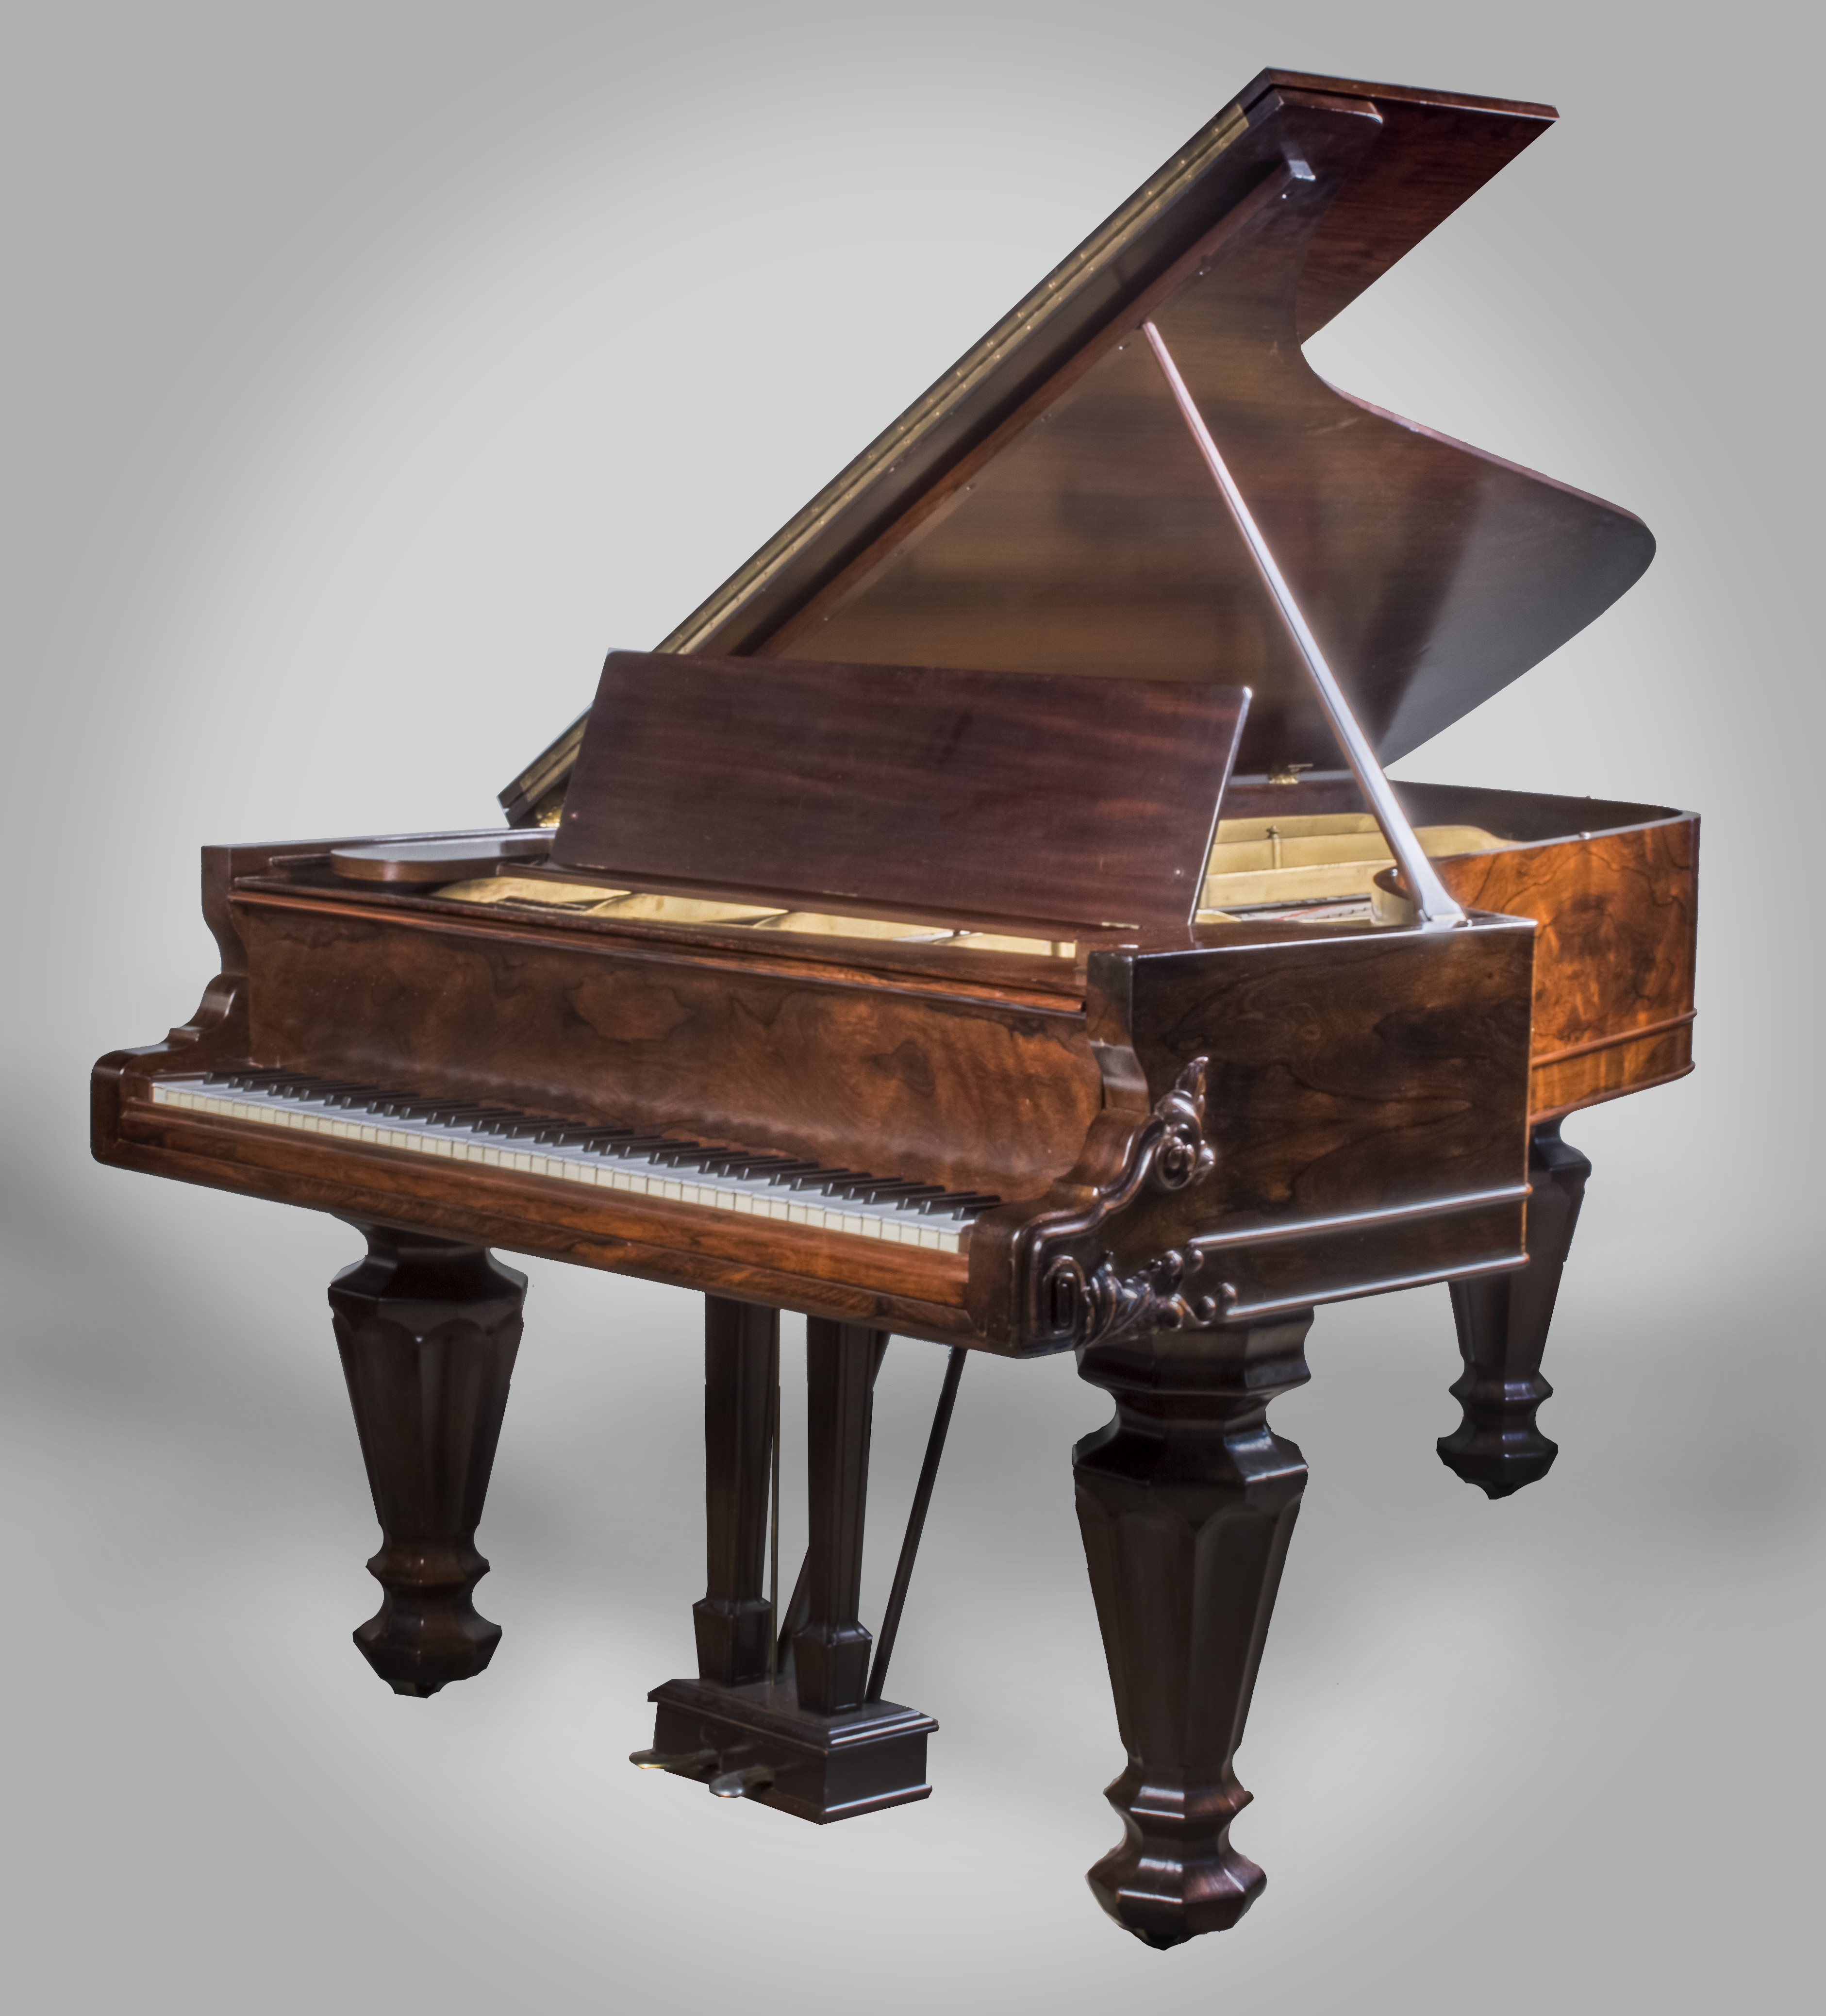 Steinway rosewood piano, late 19th century, 85 keys (est. $6,000-$8,000). Capo Auction image